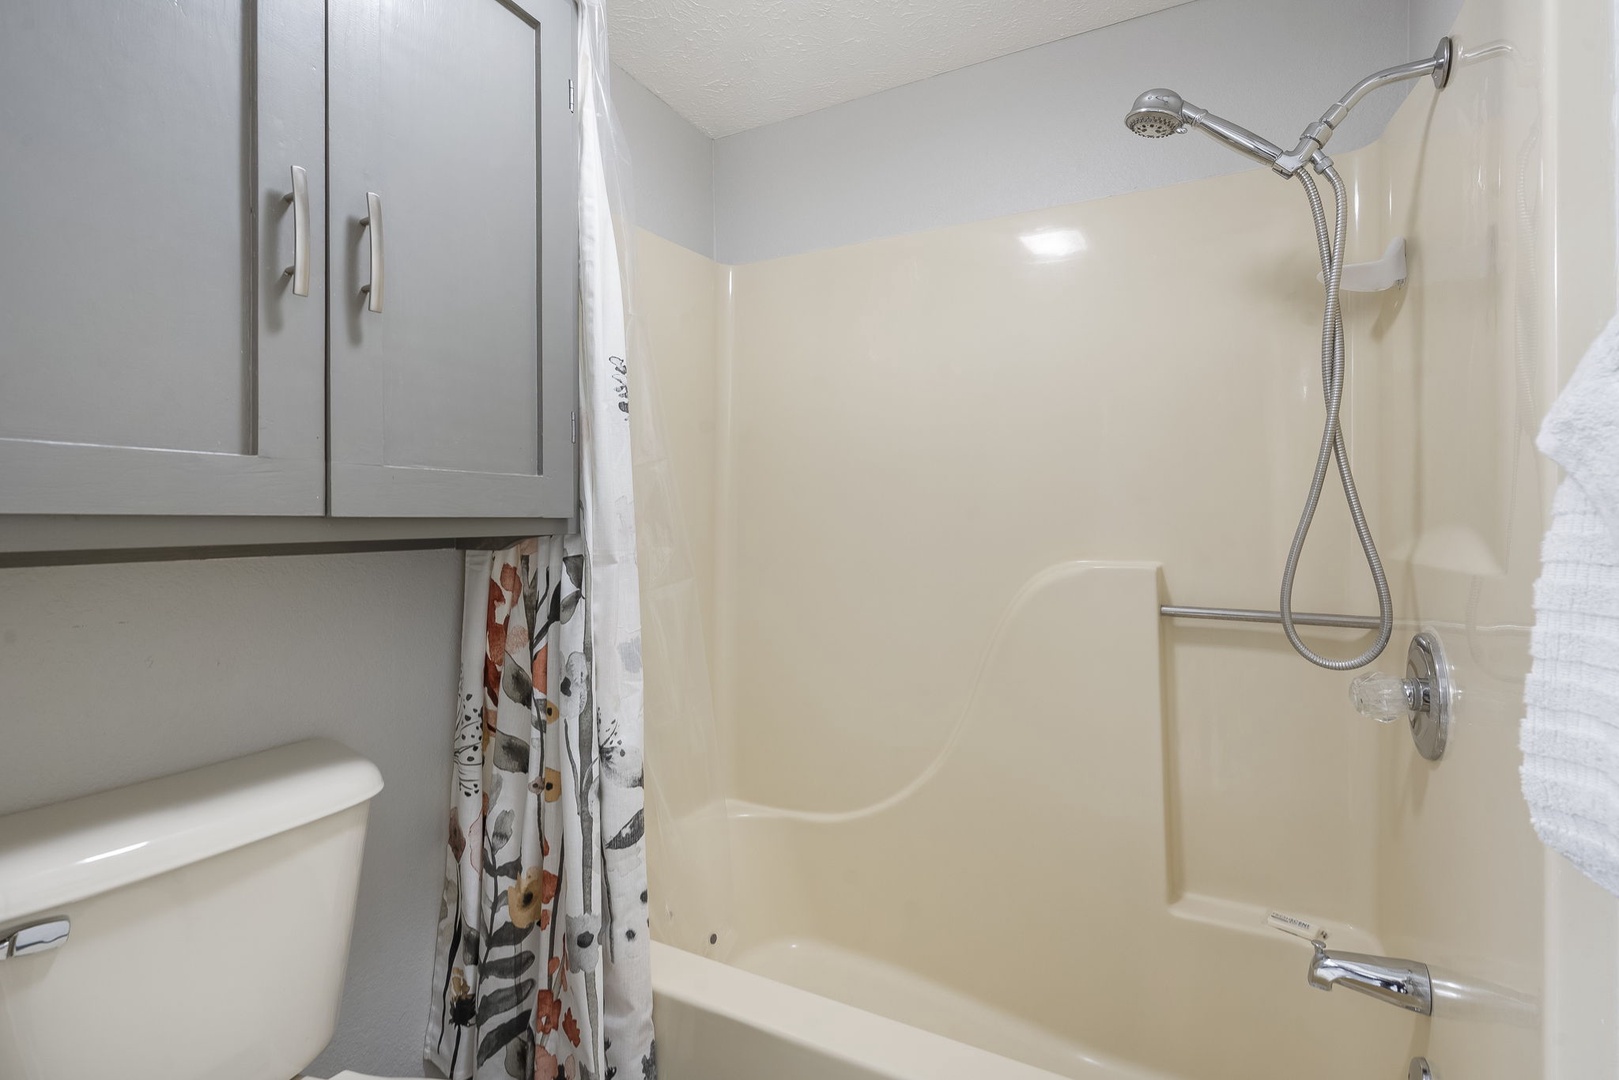 The Bathroom offers an oversized Double Vanity and Shower/Tub Combo